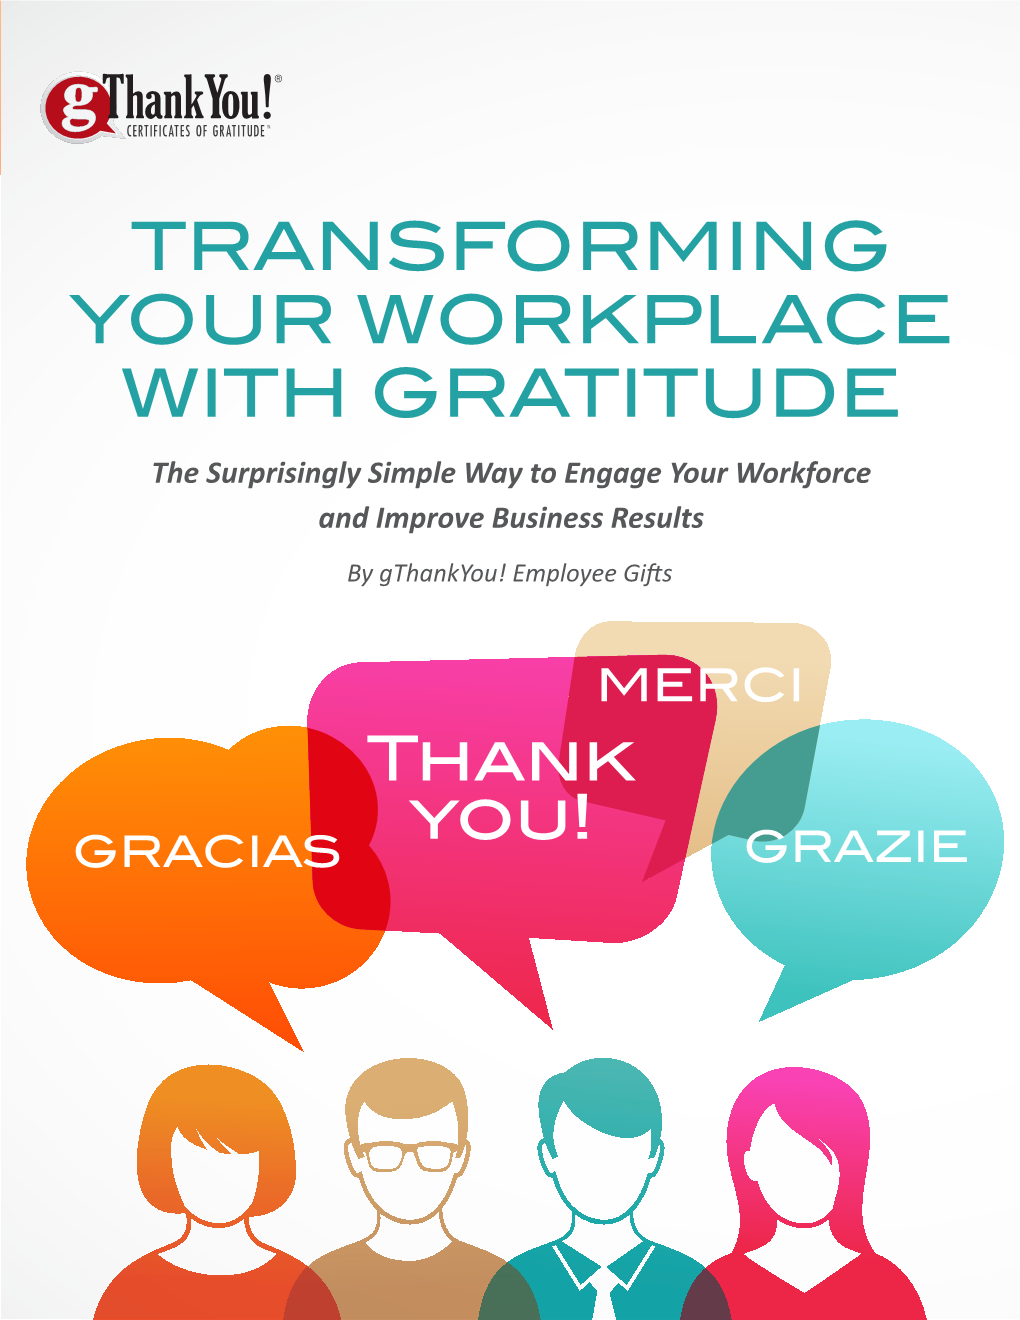 TRANSFORMING YOUR WORKPLACE with GRATITUDE the Surprisingly Simple Way to Engage Your Workforce and Improve Business Results by Gthankyou! Employee Gifts